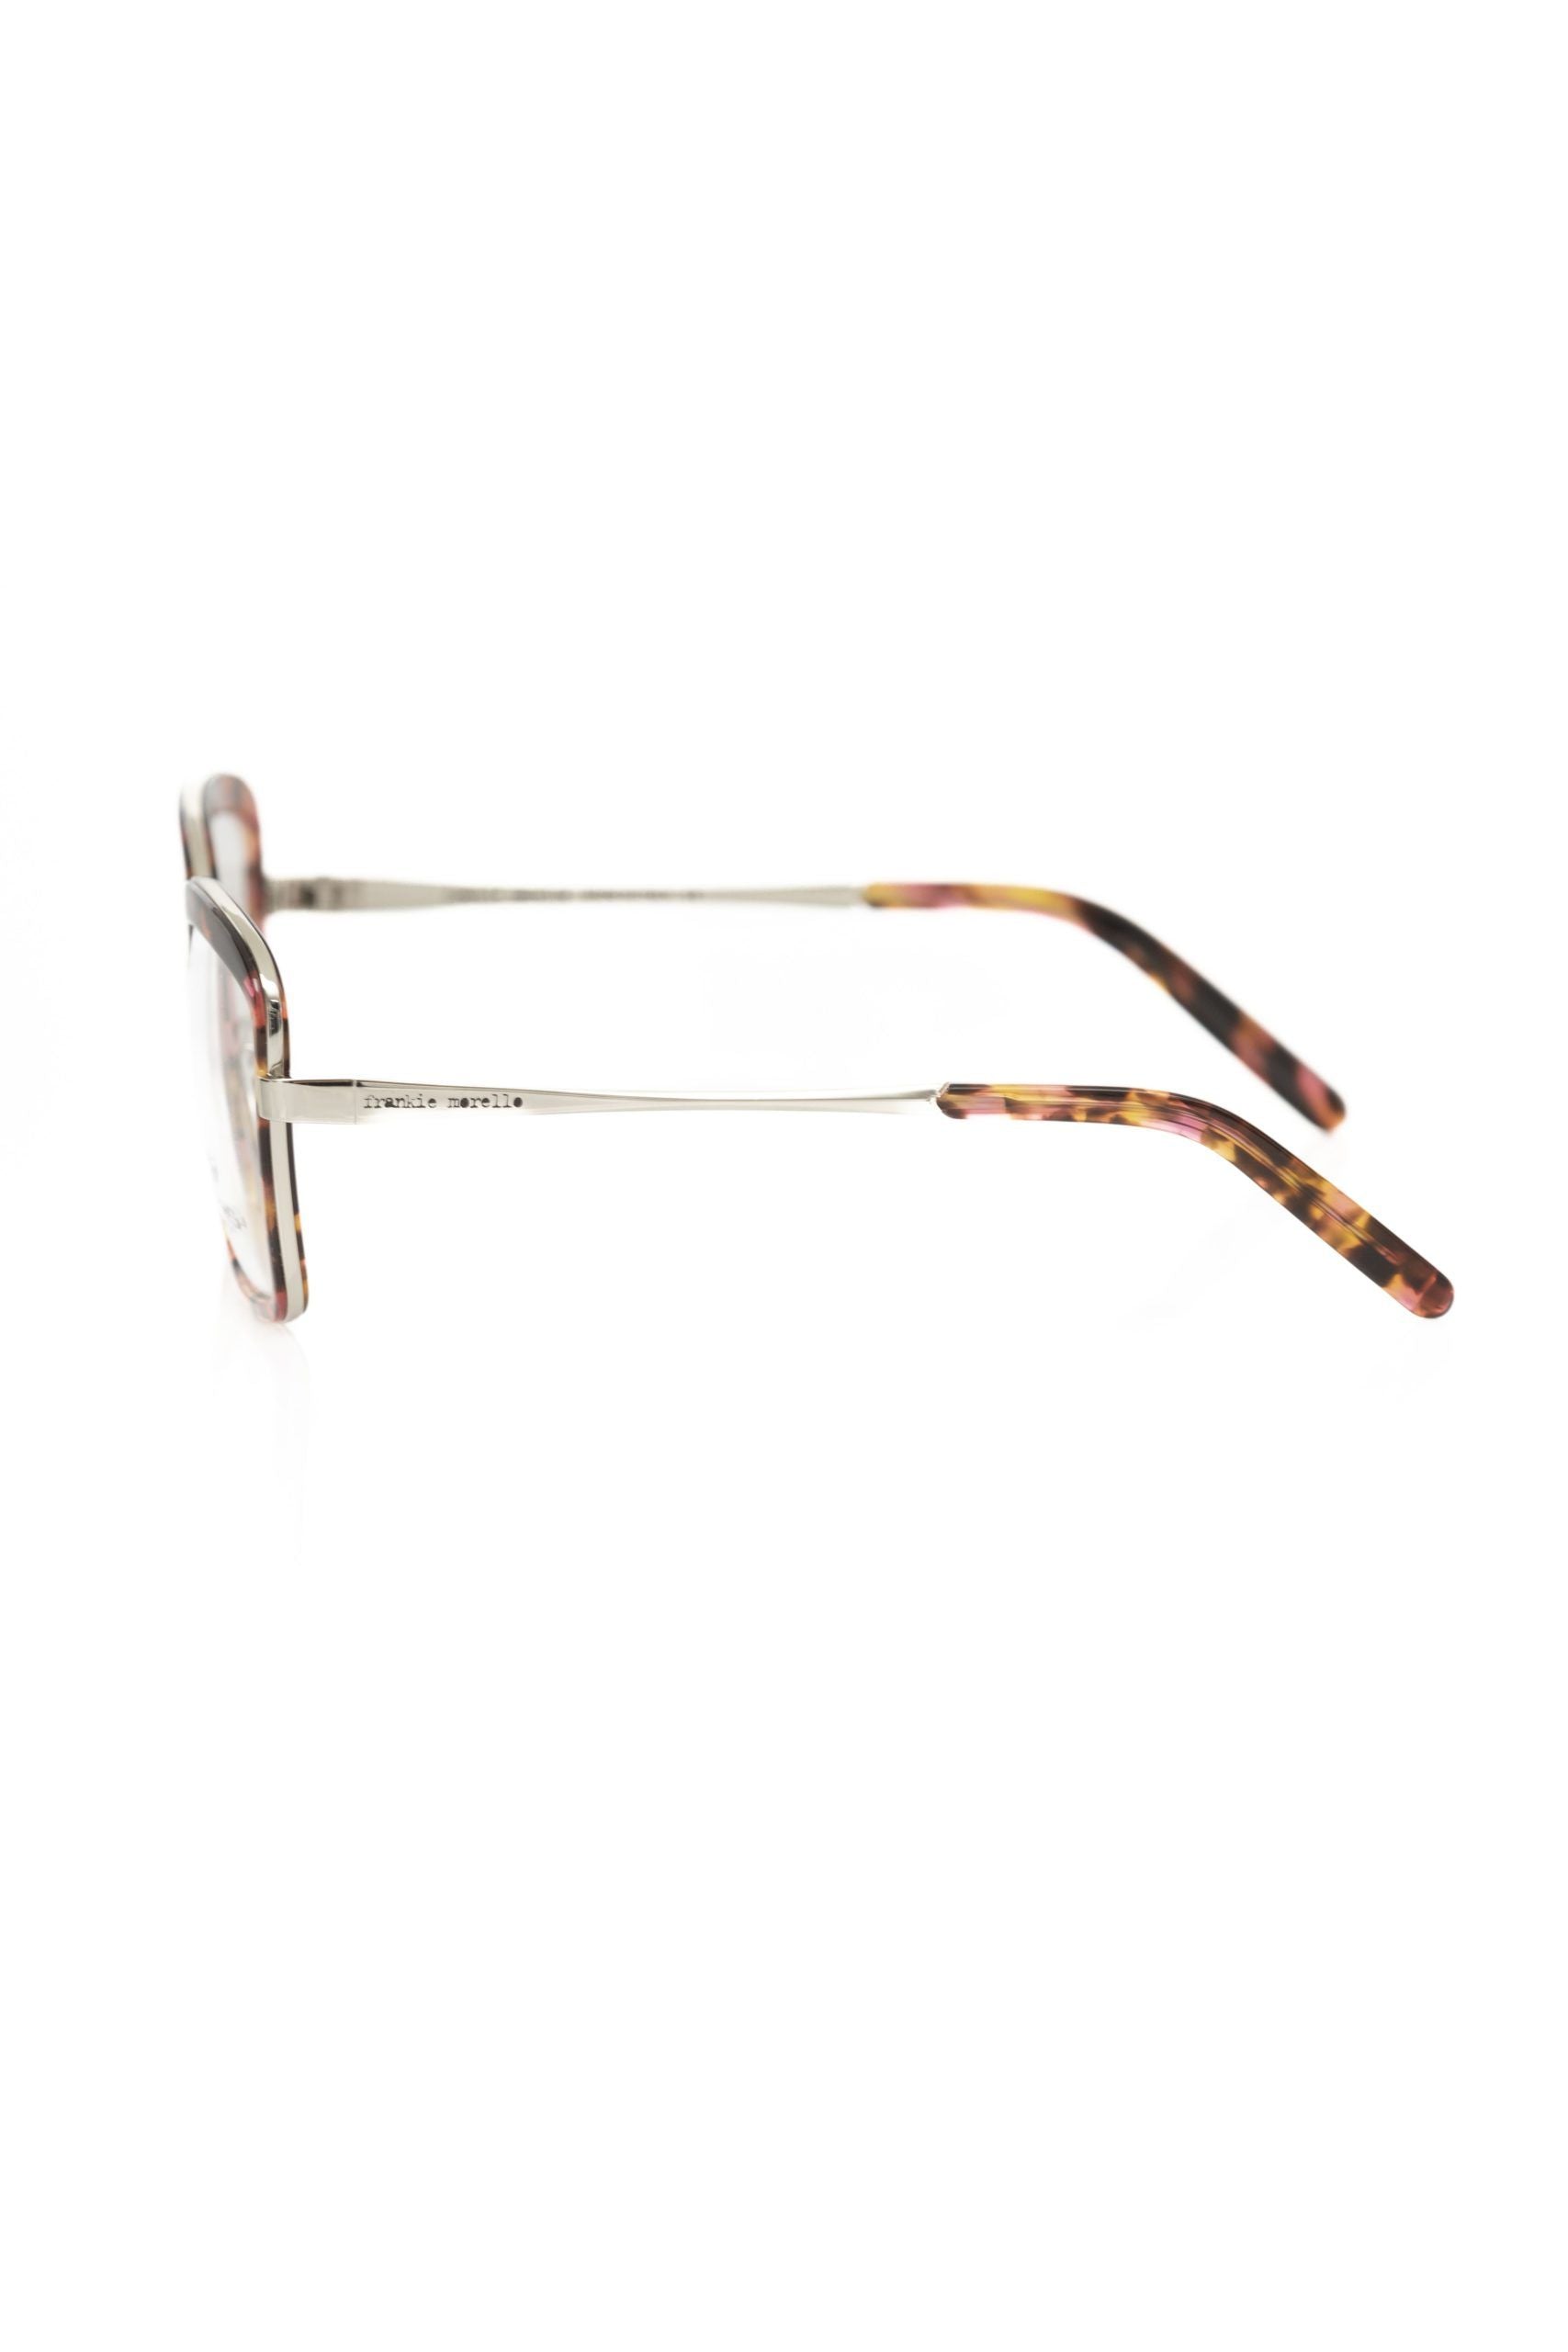 Frankie Morello FRMO-22105 Red Metallic Fibre Frames - Designed by Frankie Morello Available to Buy at a Discounted Price on Moon Behind The Hill Online Designer Discount Store